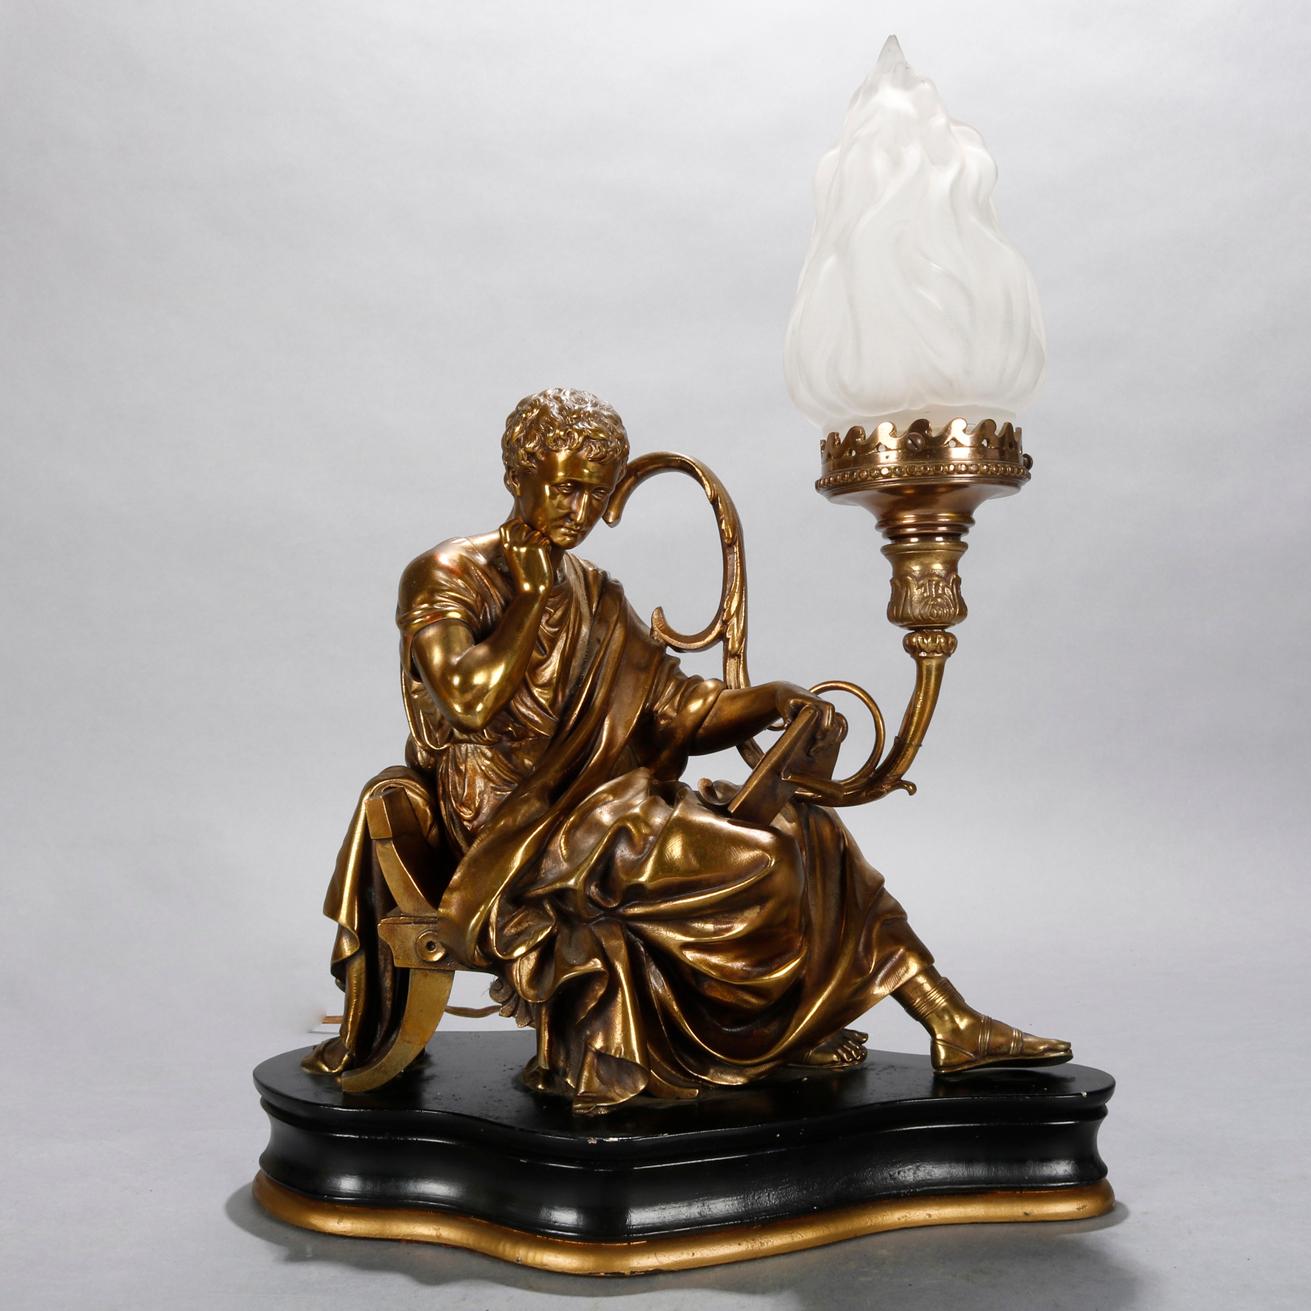 An antique Classical table lamp offers bronzed sculpture of recumbent robed man (scholar) with scrolled foliate form lamp terminating in light with flame form glass shade and seated on shaped ebonized wood base having gilt banding, working and wired